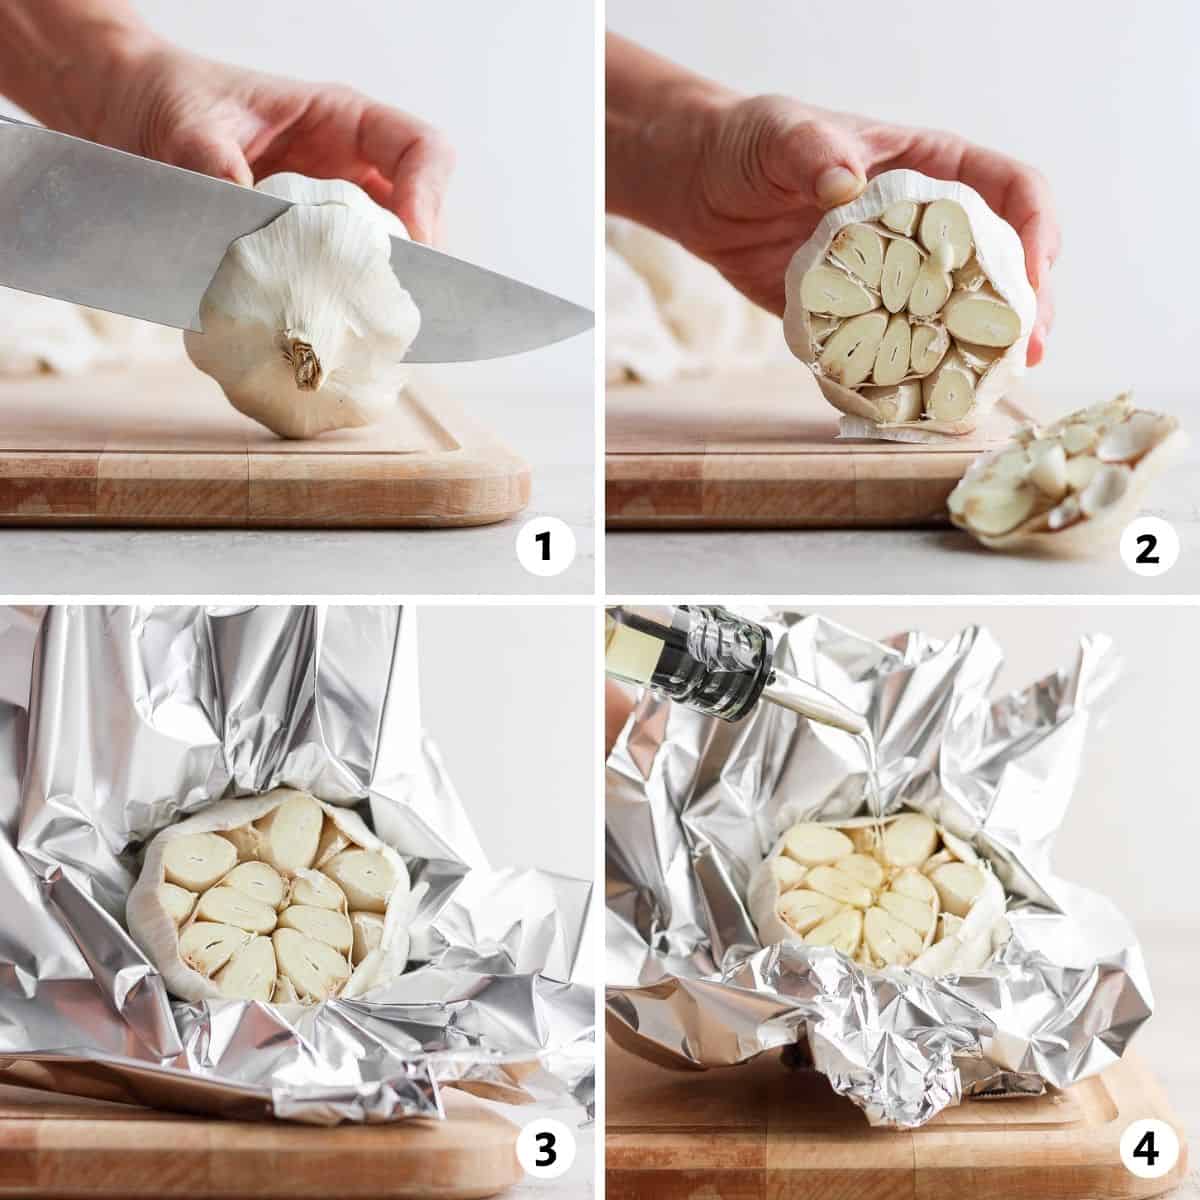 4 image collage to show how to roast a head of garlic in the oven